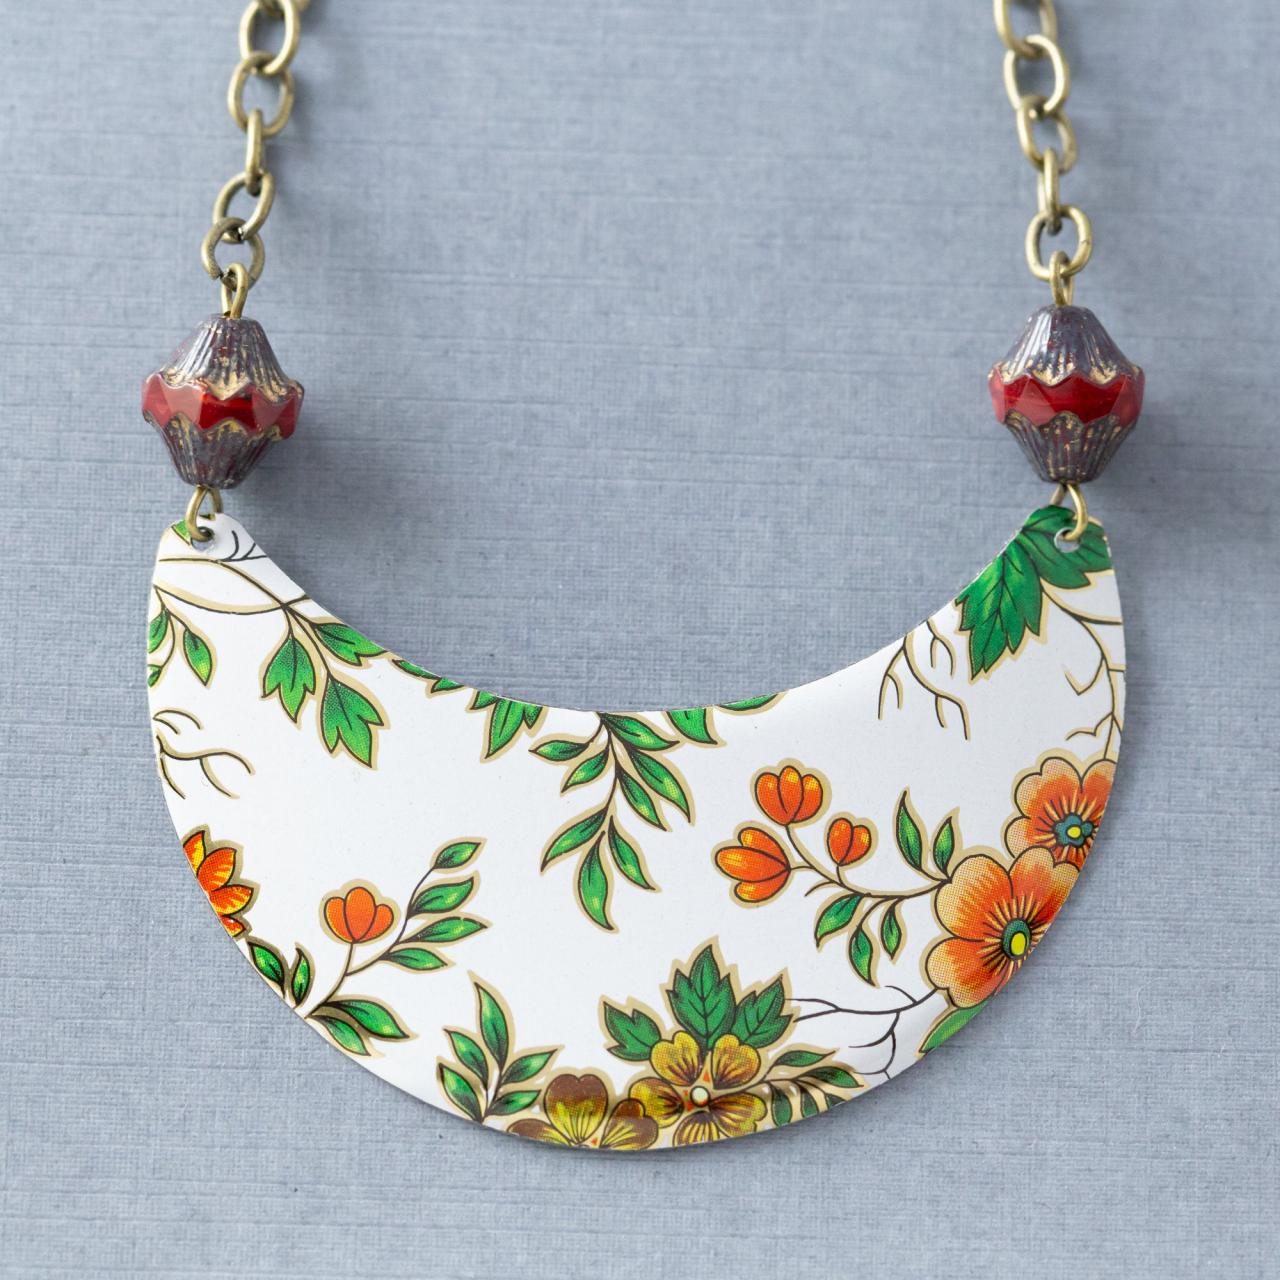 Red & Green Semicircle Necklace, Crescent Necklace, Flower Necklace, Floral Necklace, Boho Jewelry, Tin Jewelry, Bohemian Jewelry